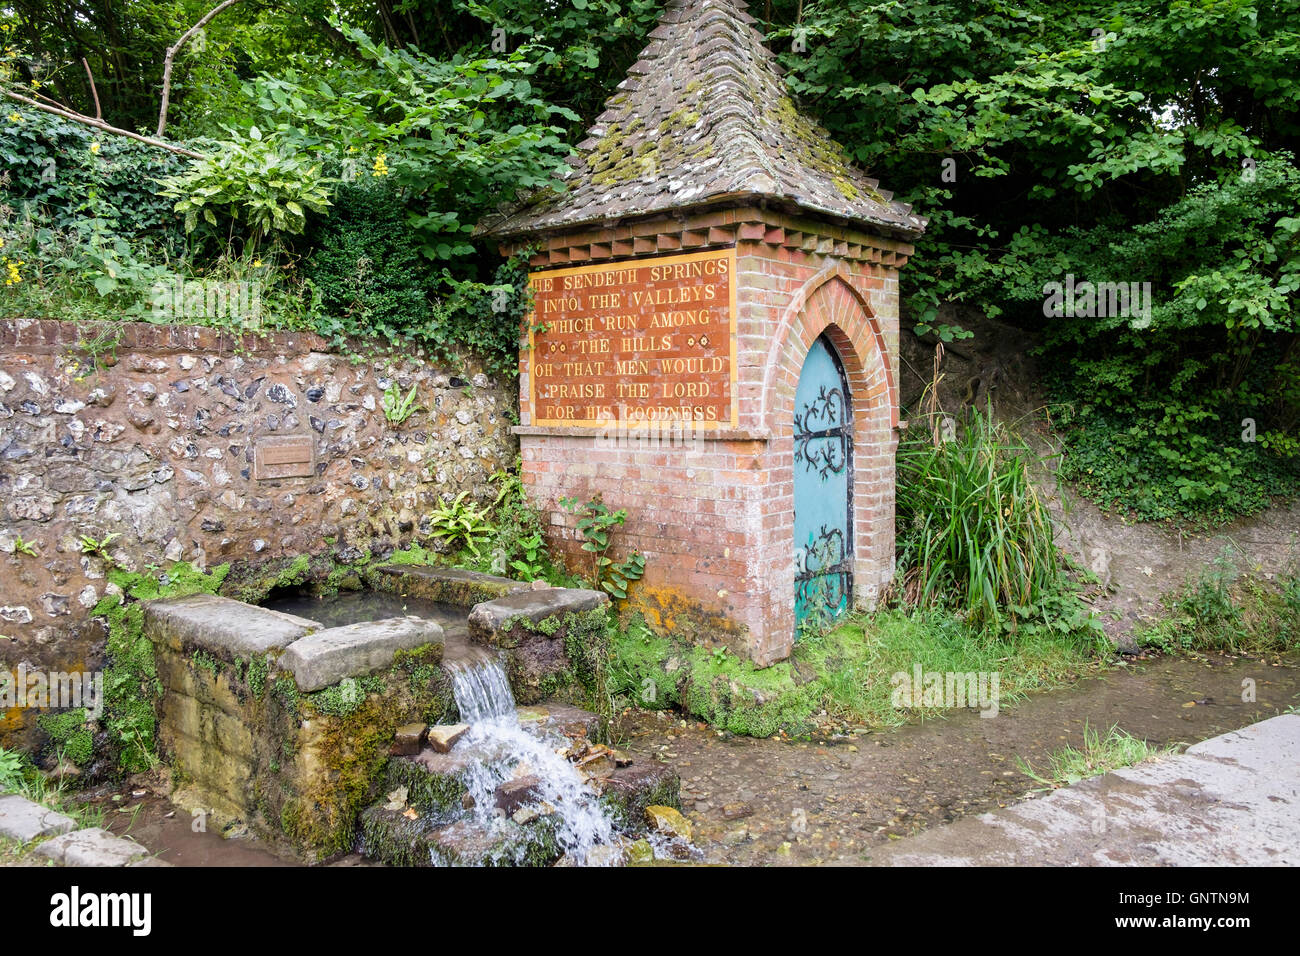 The Spring and Pump House with religious inscription in country village in South Downs National Park. Fulking Sussex England UK Stock Photo